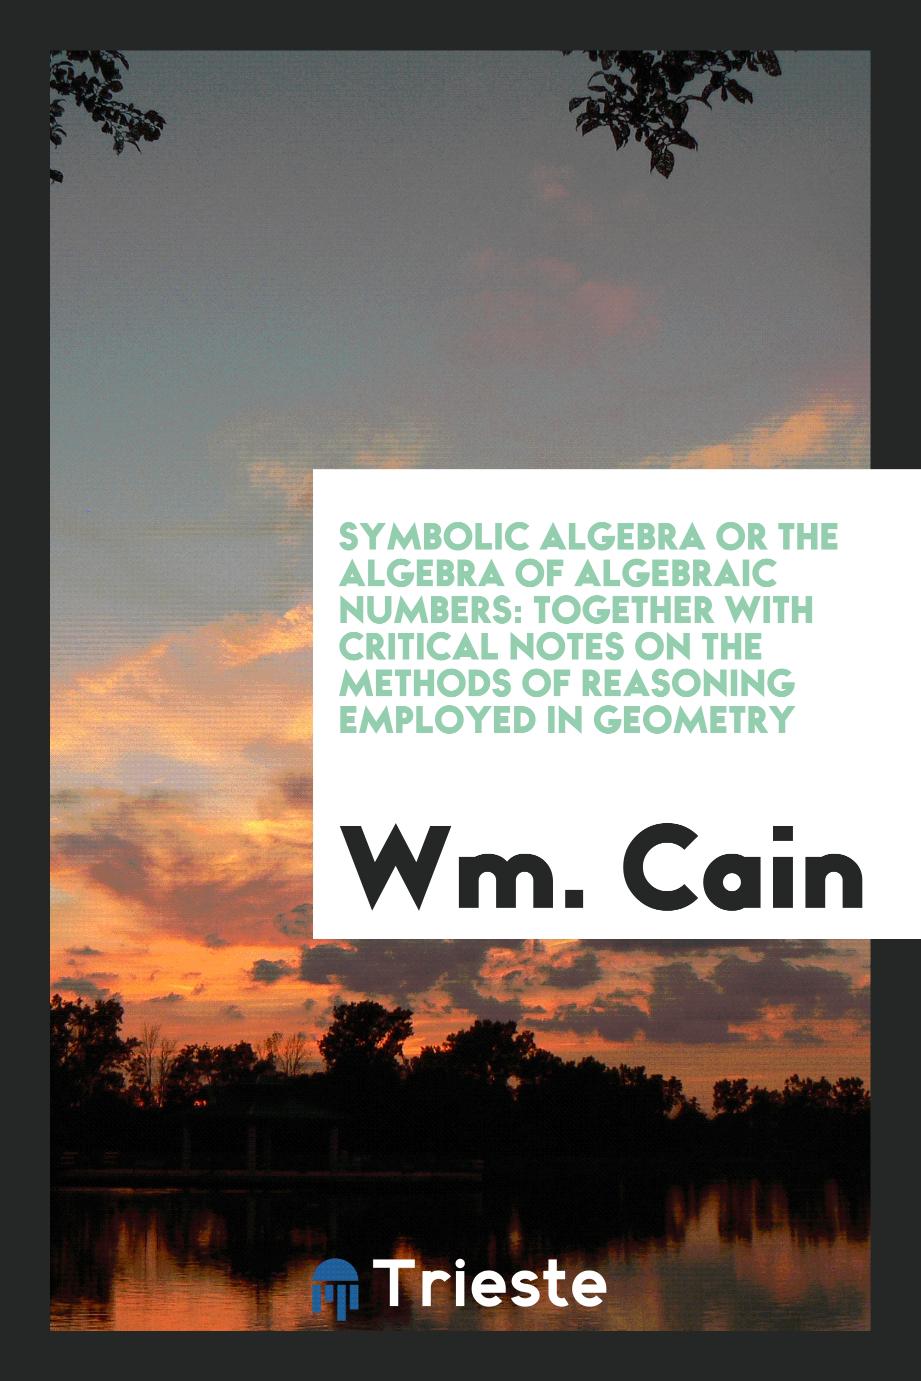 Symbolic Algebra or the Algebra of Algebraic Numbers: Together with Critical Notes on the Methods of Reasoning Employed in Geometry